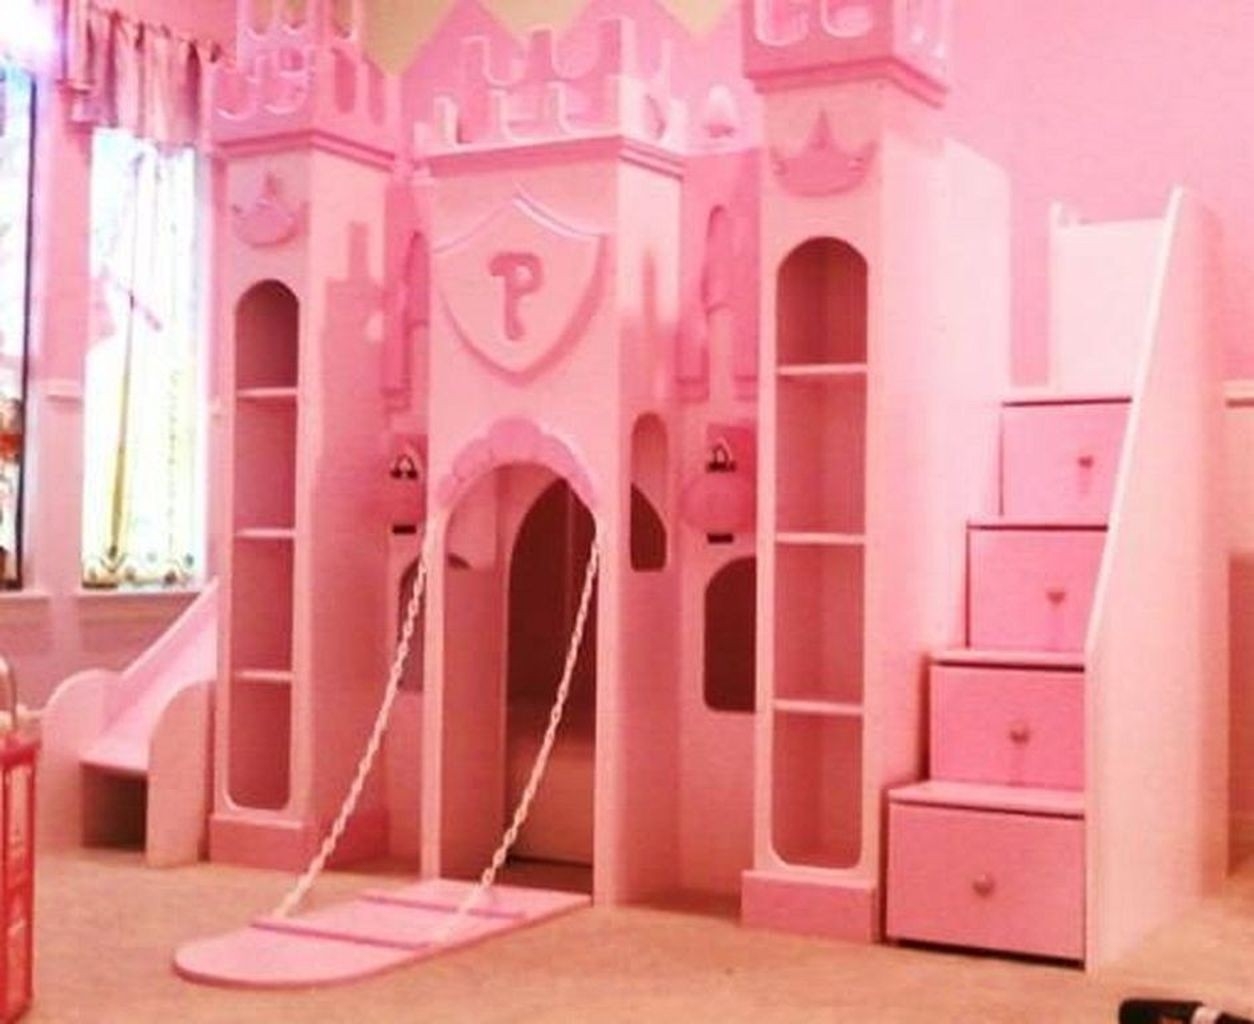 bed for girl princess